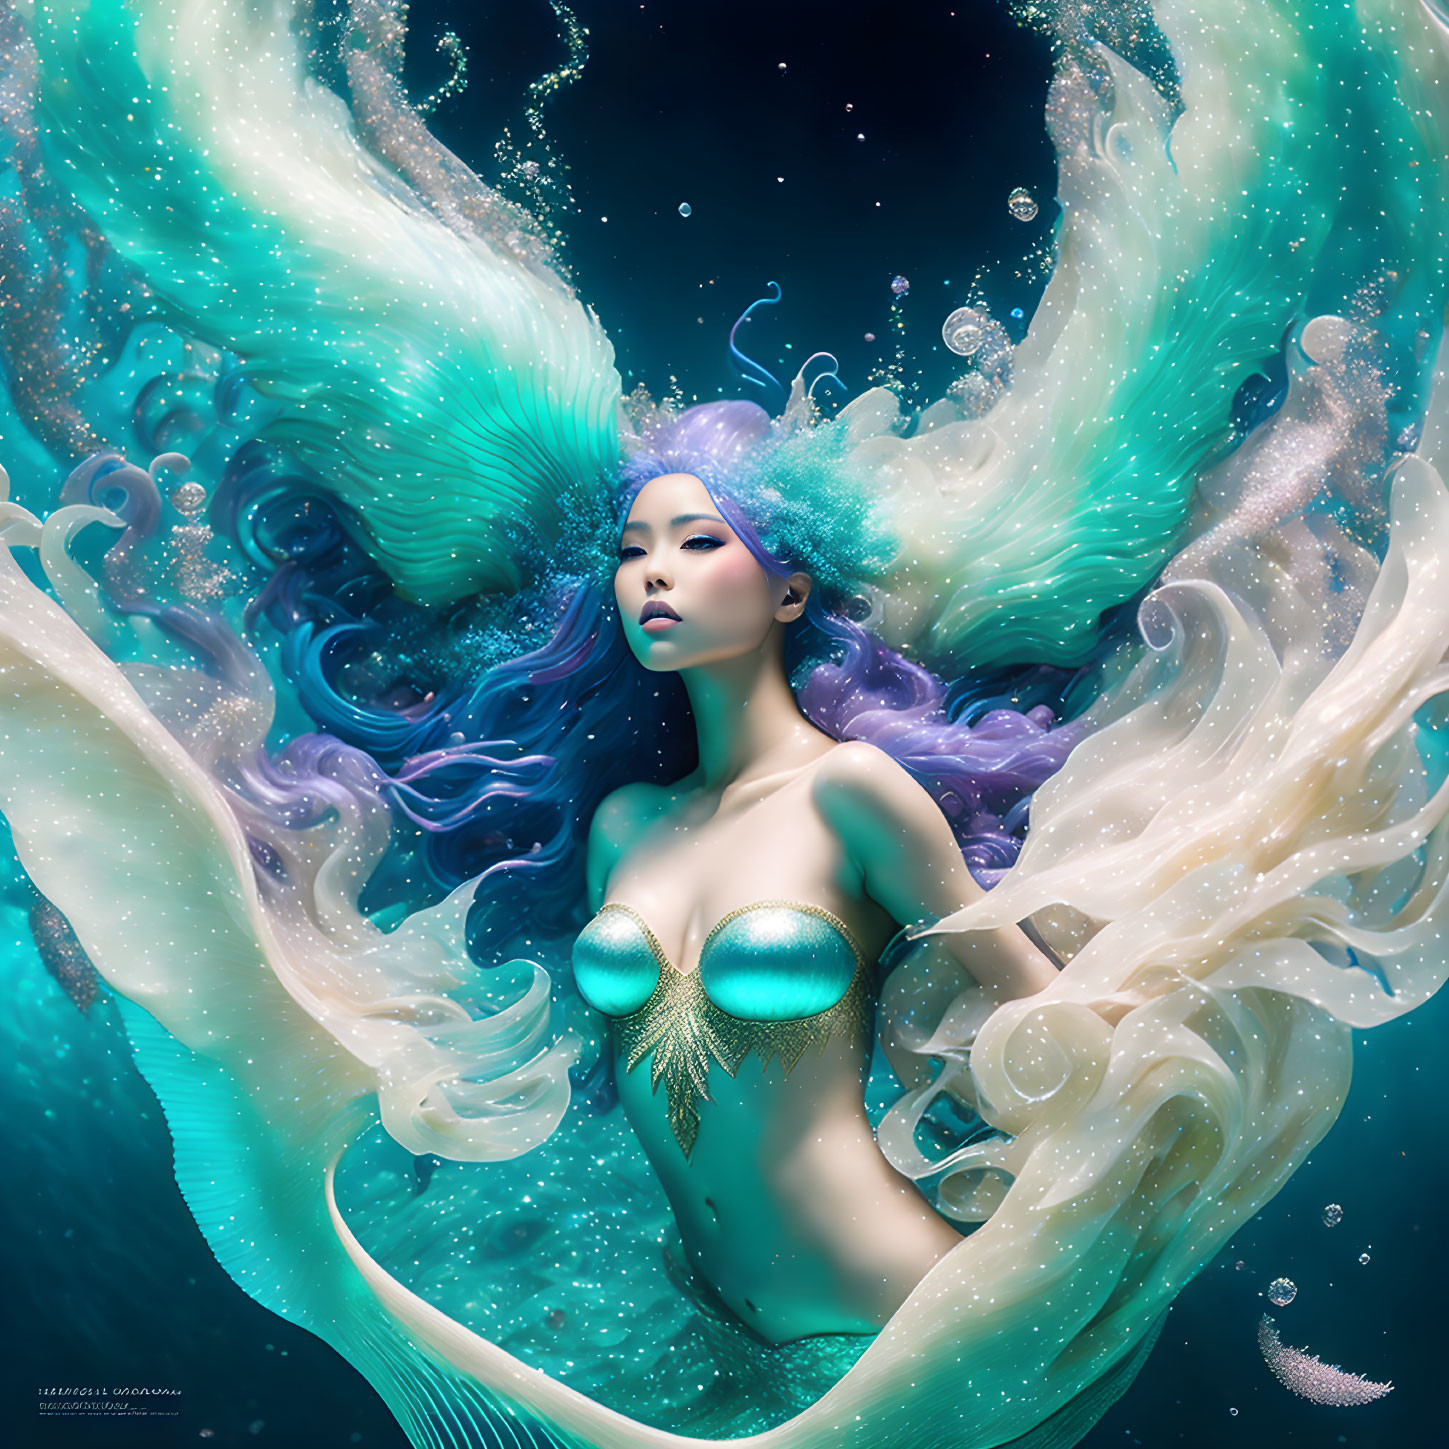 Mermaid with Blue Hair and Tail in Underwater Scene